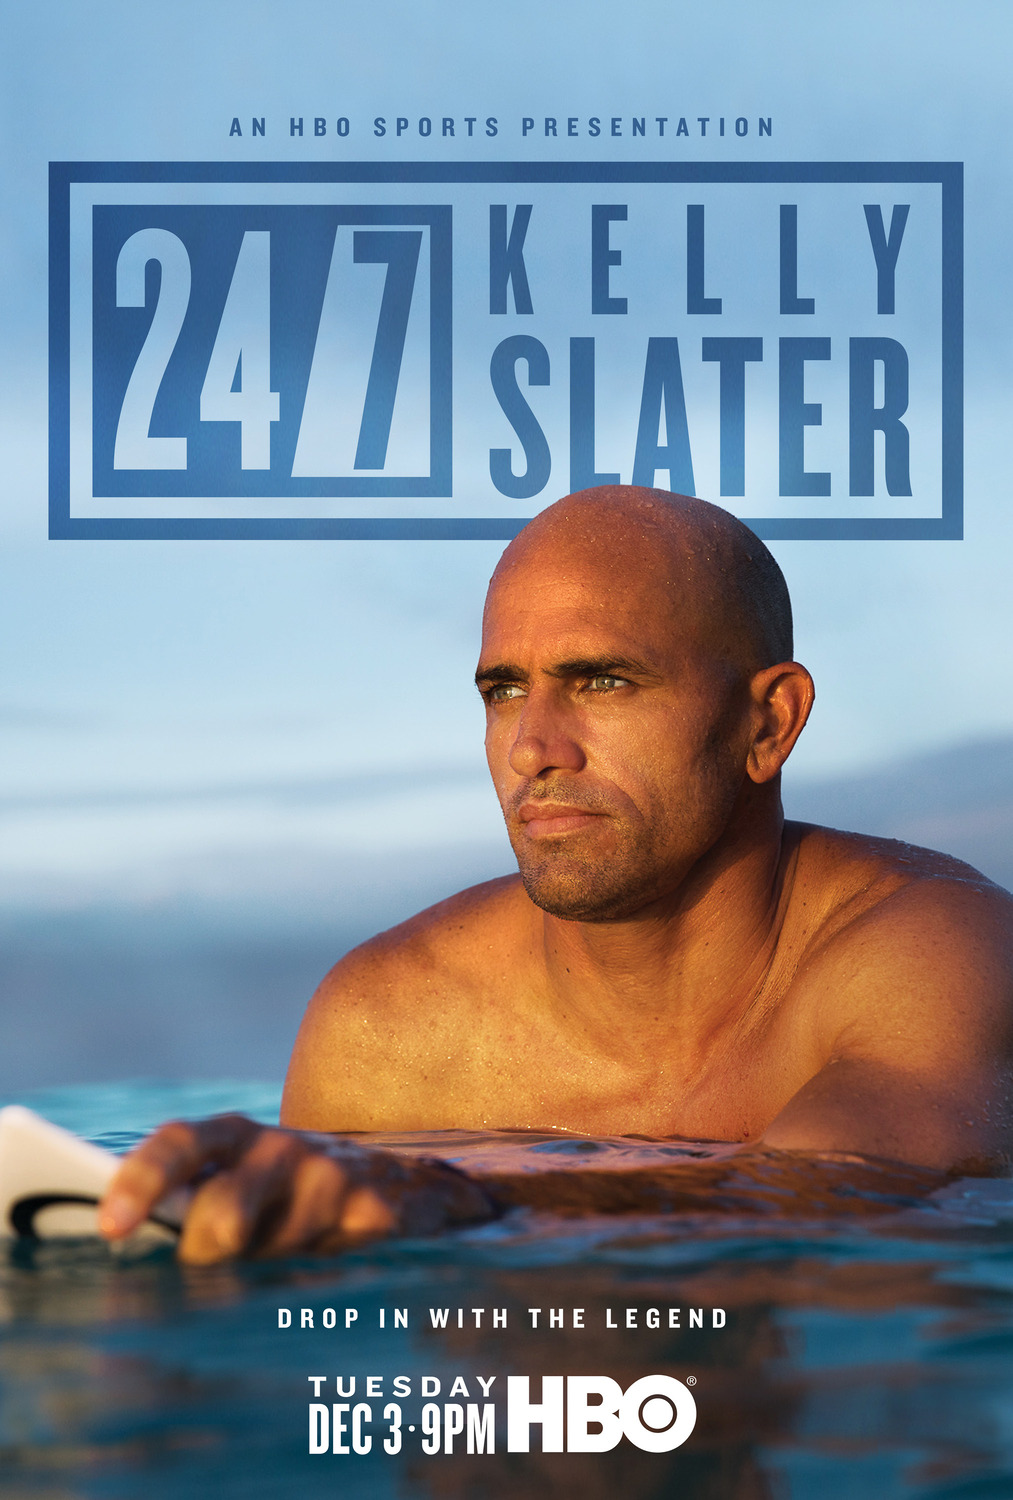 Extra Large TV Poster Image for 24/7: Kelly Slater 